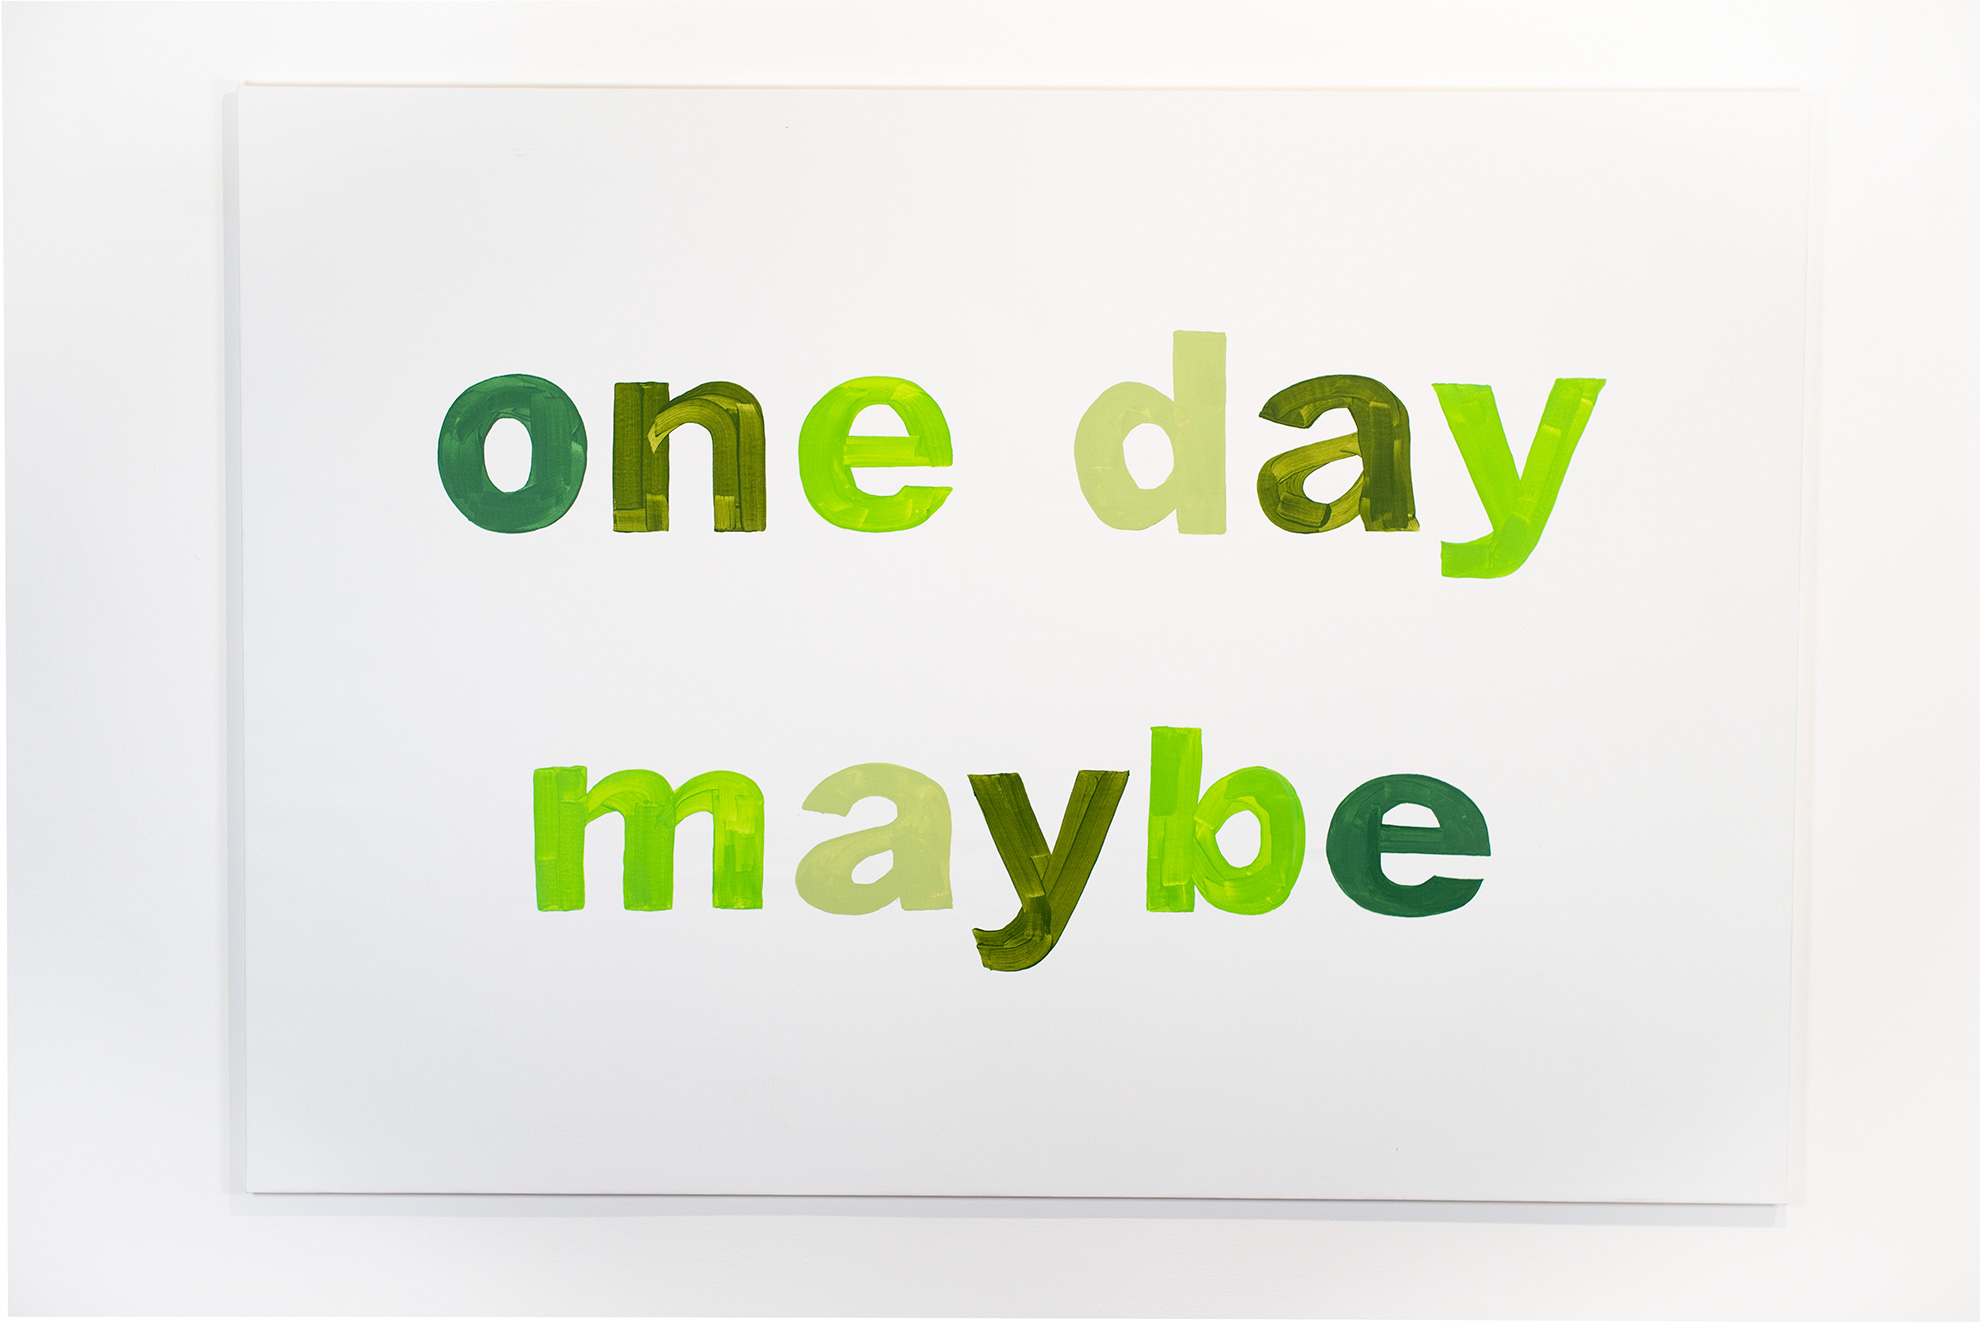 One day maybe, 2023 Acrylic on Canvas, 145 x 204 cm.